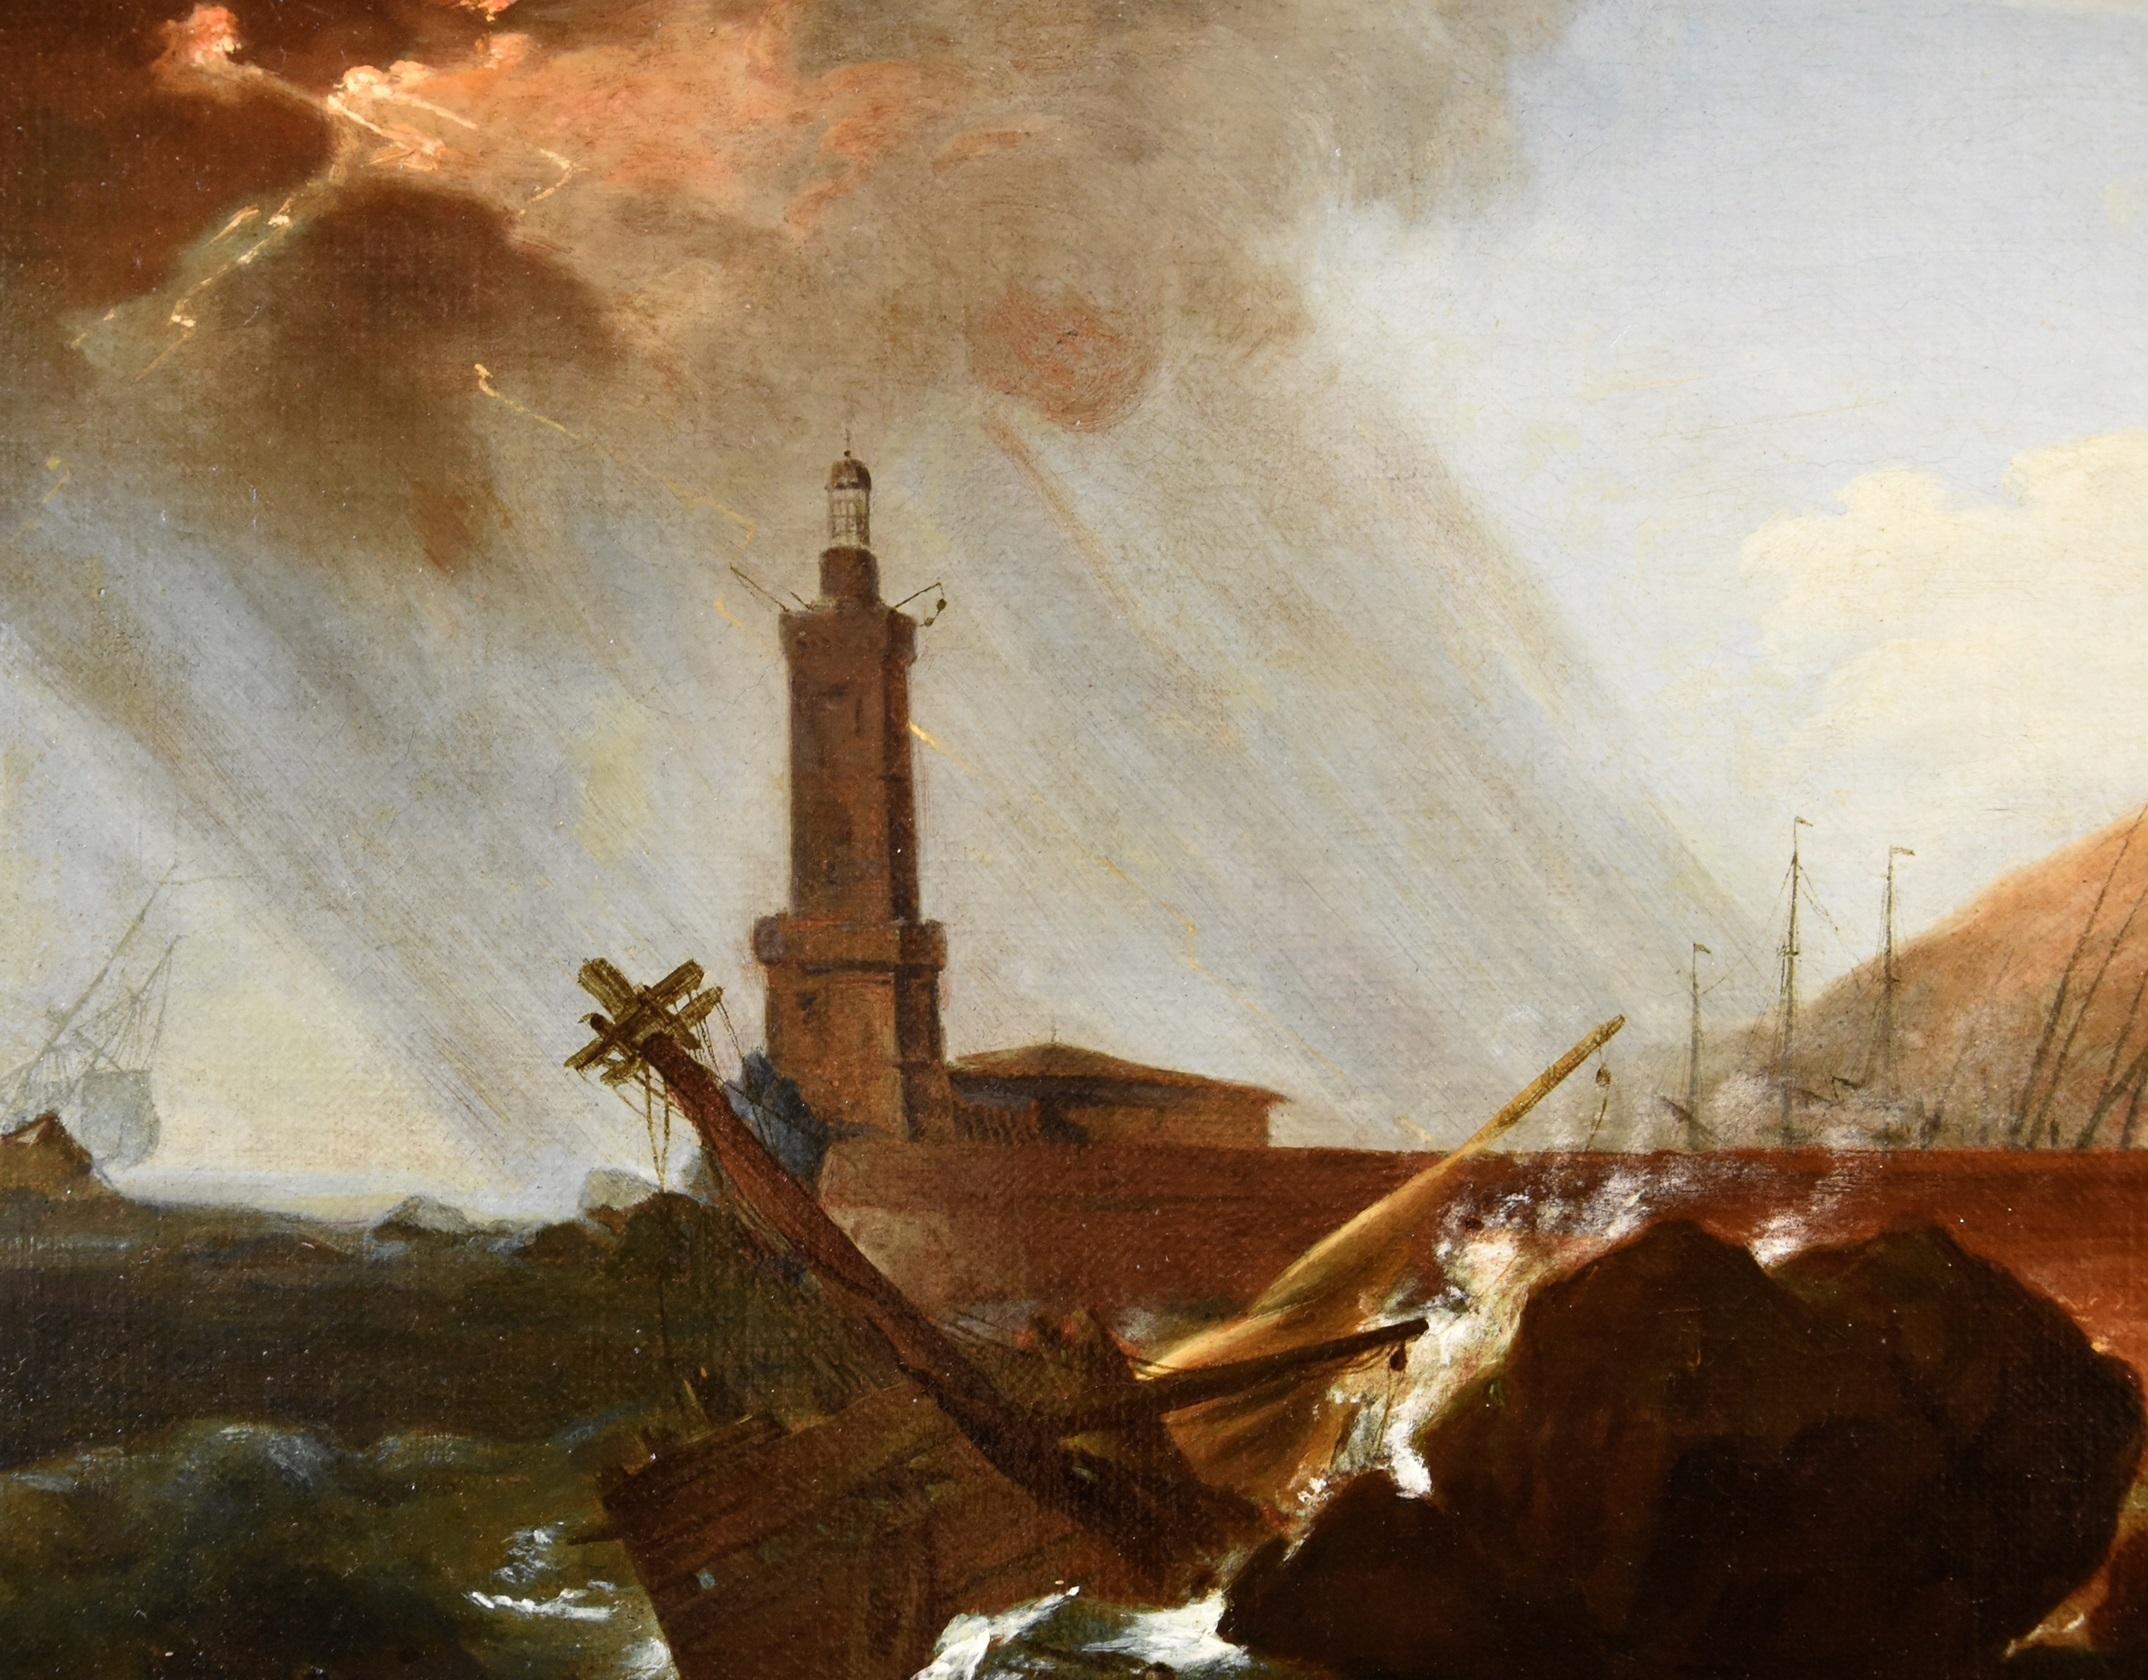 Claude-Joseph Vernet (Avignon, 1714 - Paris, 1789)
workshop of

The Storm on the Lighthouse

1750/60

Technique: Oil on canvas
Dimensions: 48 x 67 cm / framed 77 x 93 cm


We share a highly pleasing work, a splendid marine executed by a talented